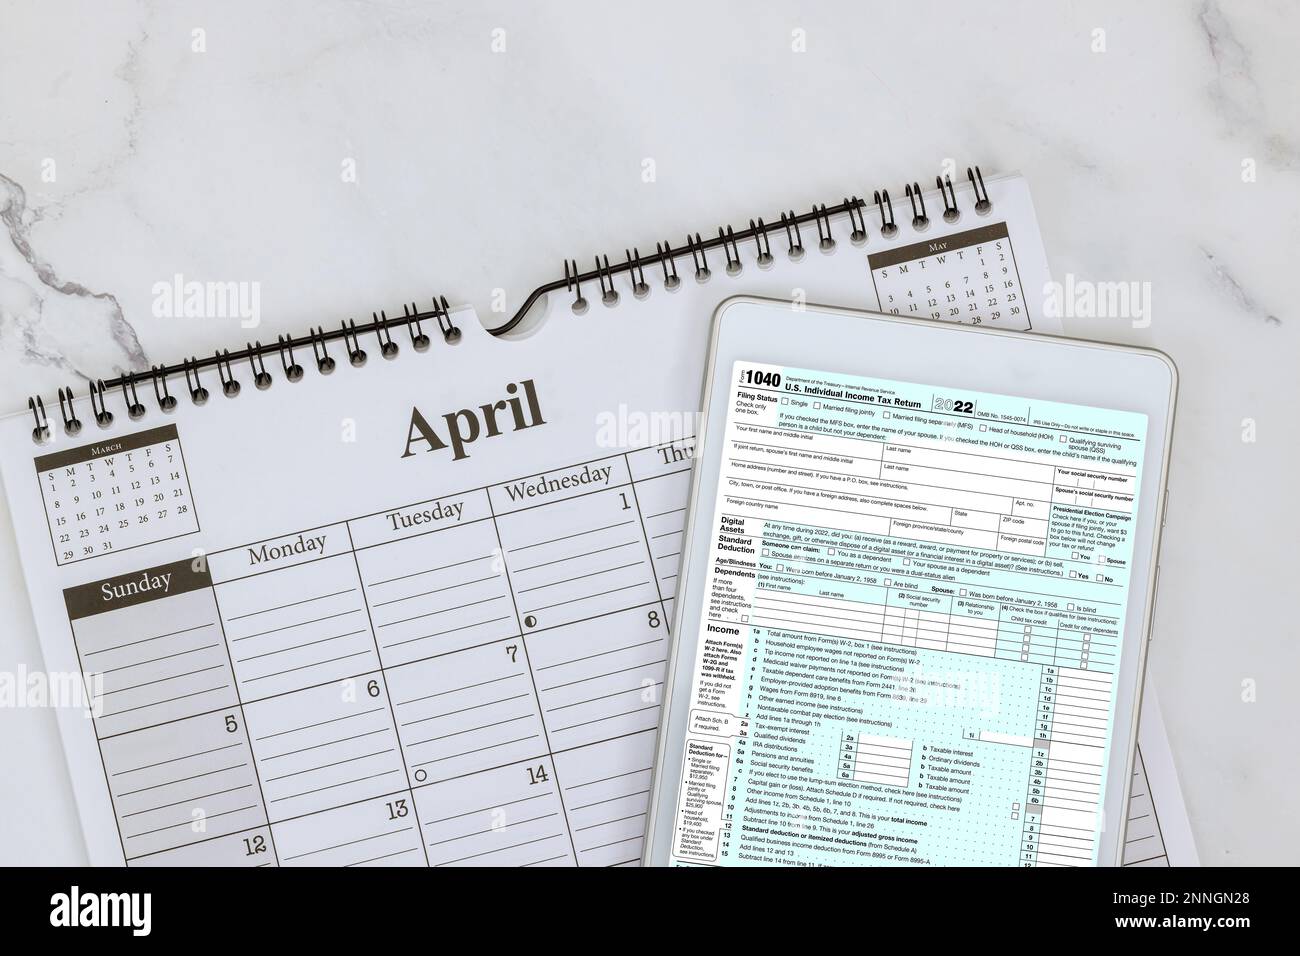 Tax season has begun in United States with 1040 form which is used by individuals to file their tax returns Stock Photo